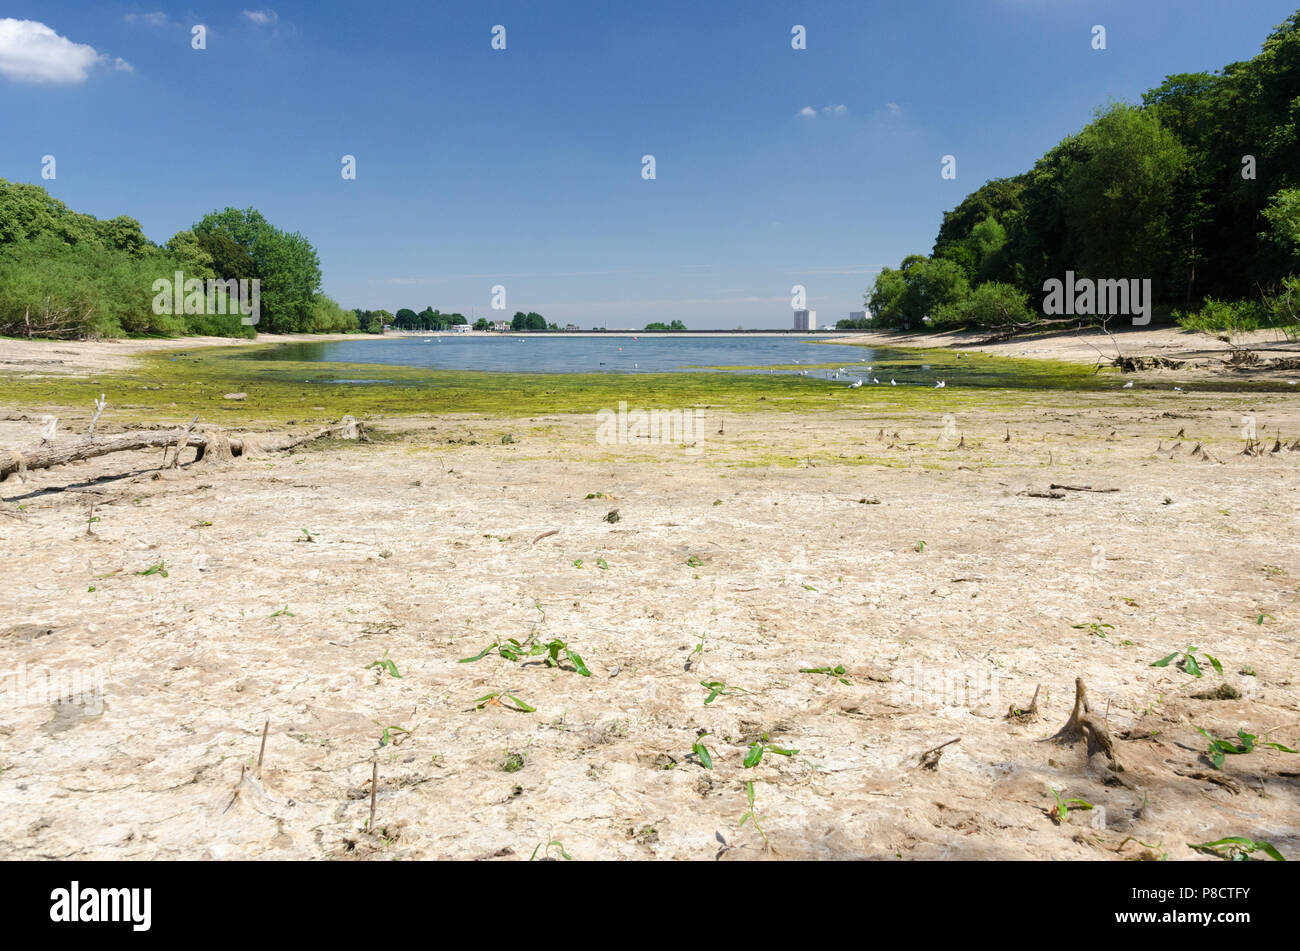 Edgbaston,Birmingham, UK. 11th July 2018. The continued dry weather in Birmingham has caused very low water levels at Edgbaston Reservoir which feeds the canal network. Credit: Nick Maslen/Alamy Live News Stock Photo